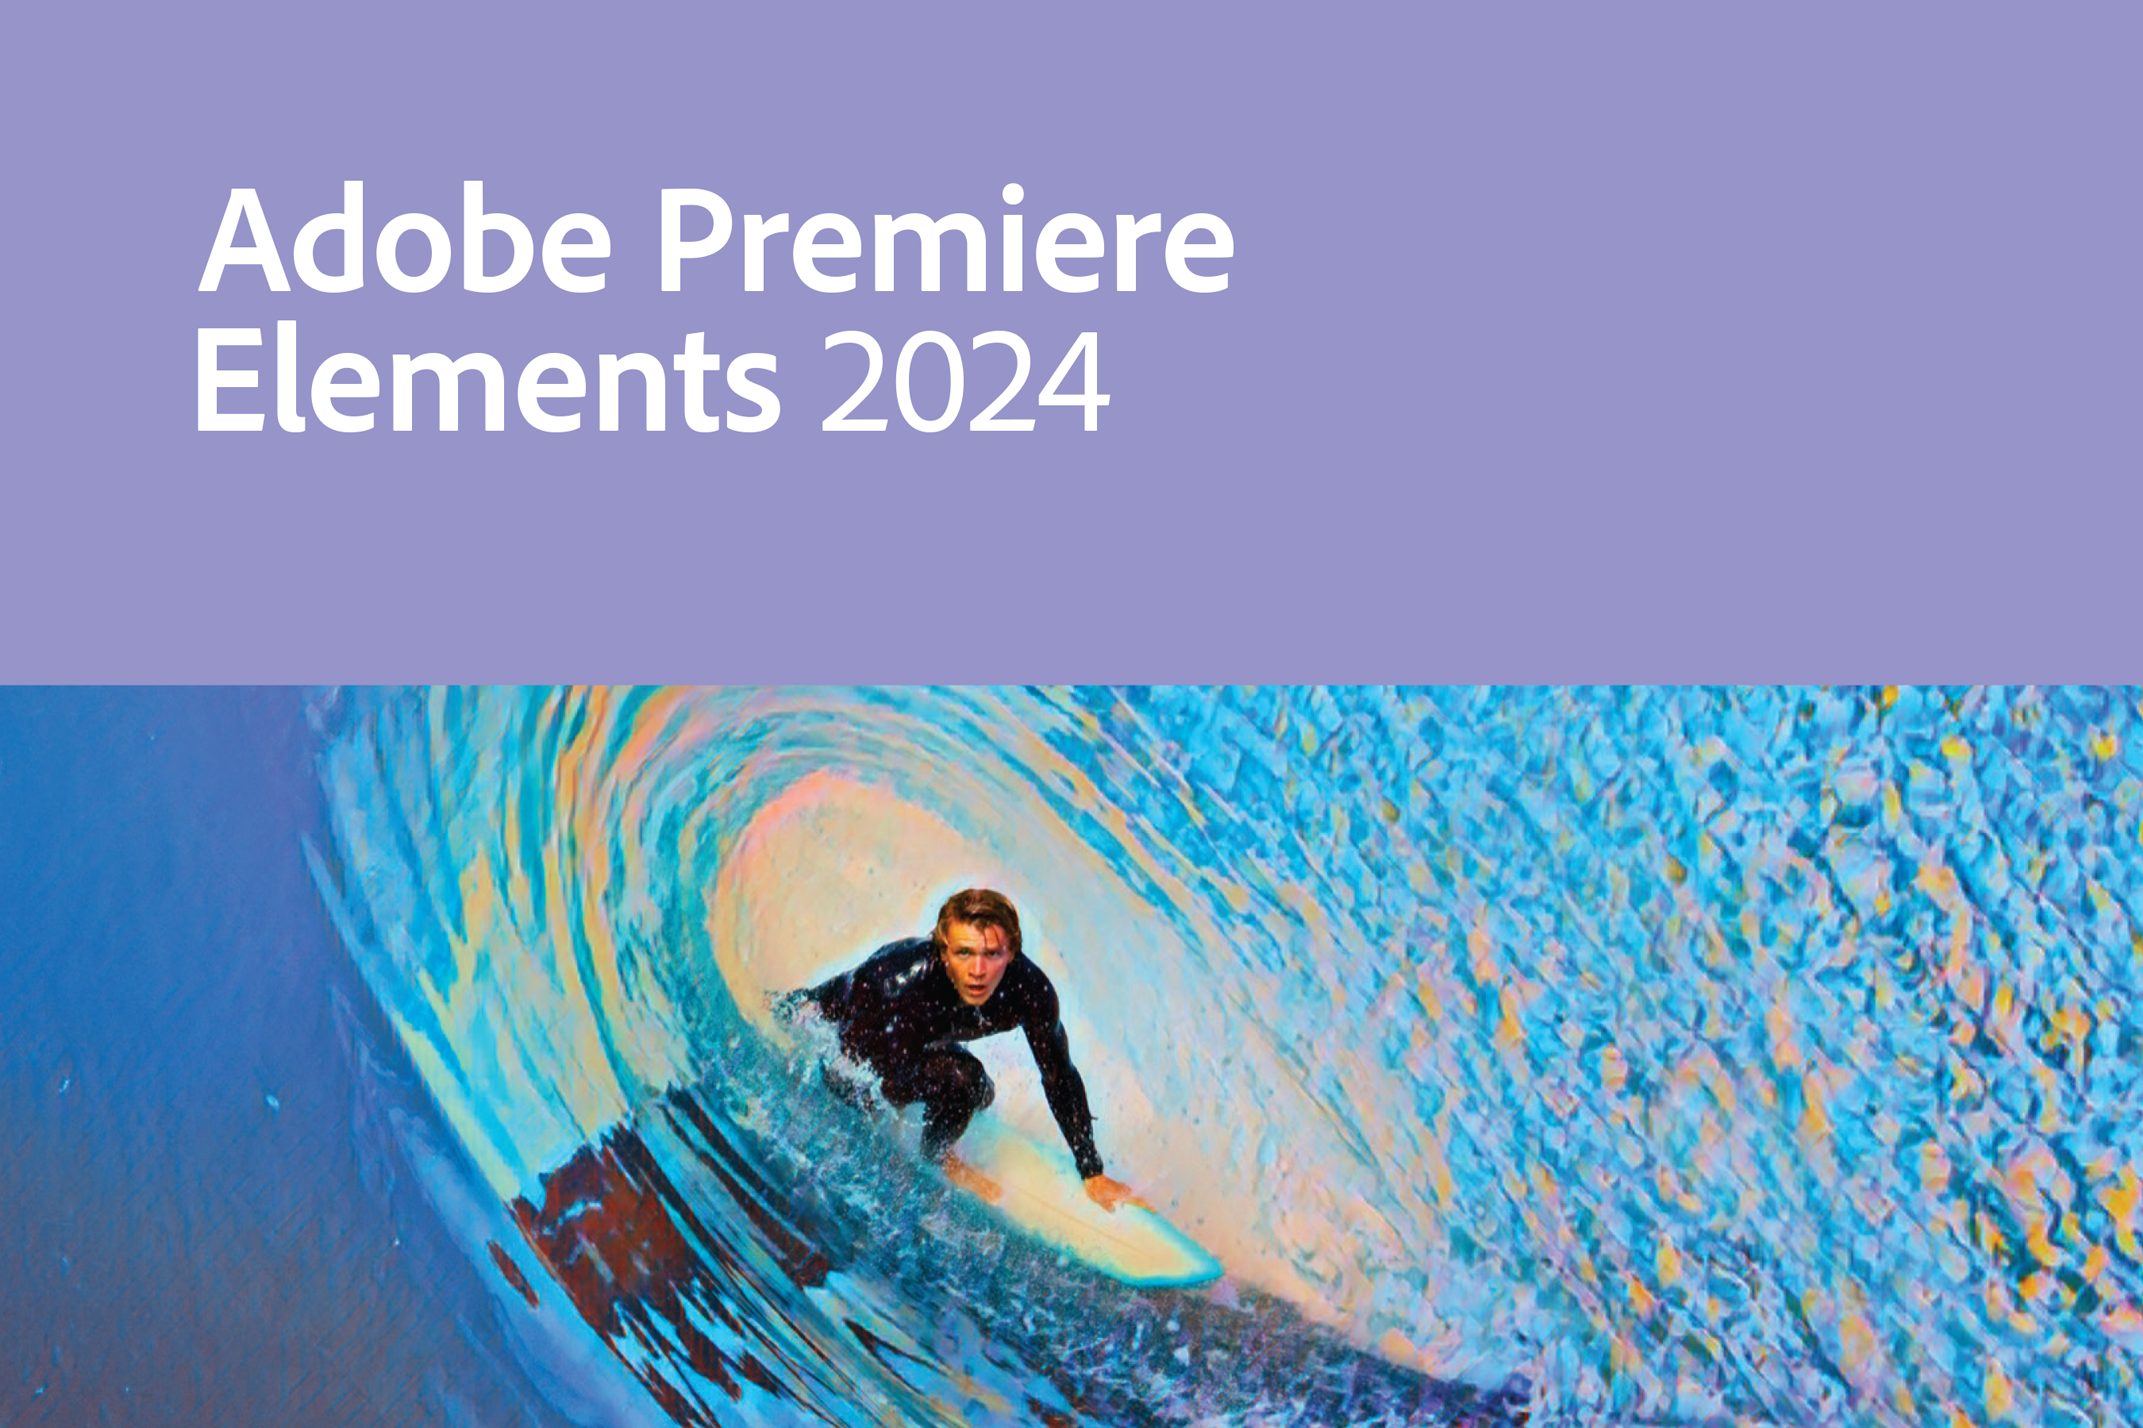 Adobe Premiere Elements 2020: A powerful video editing software with intuitive features and tools